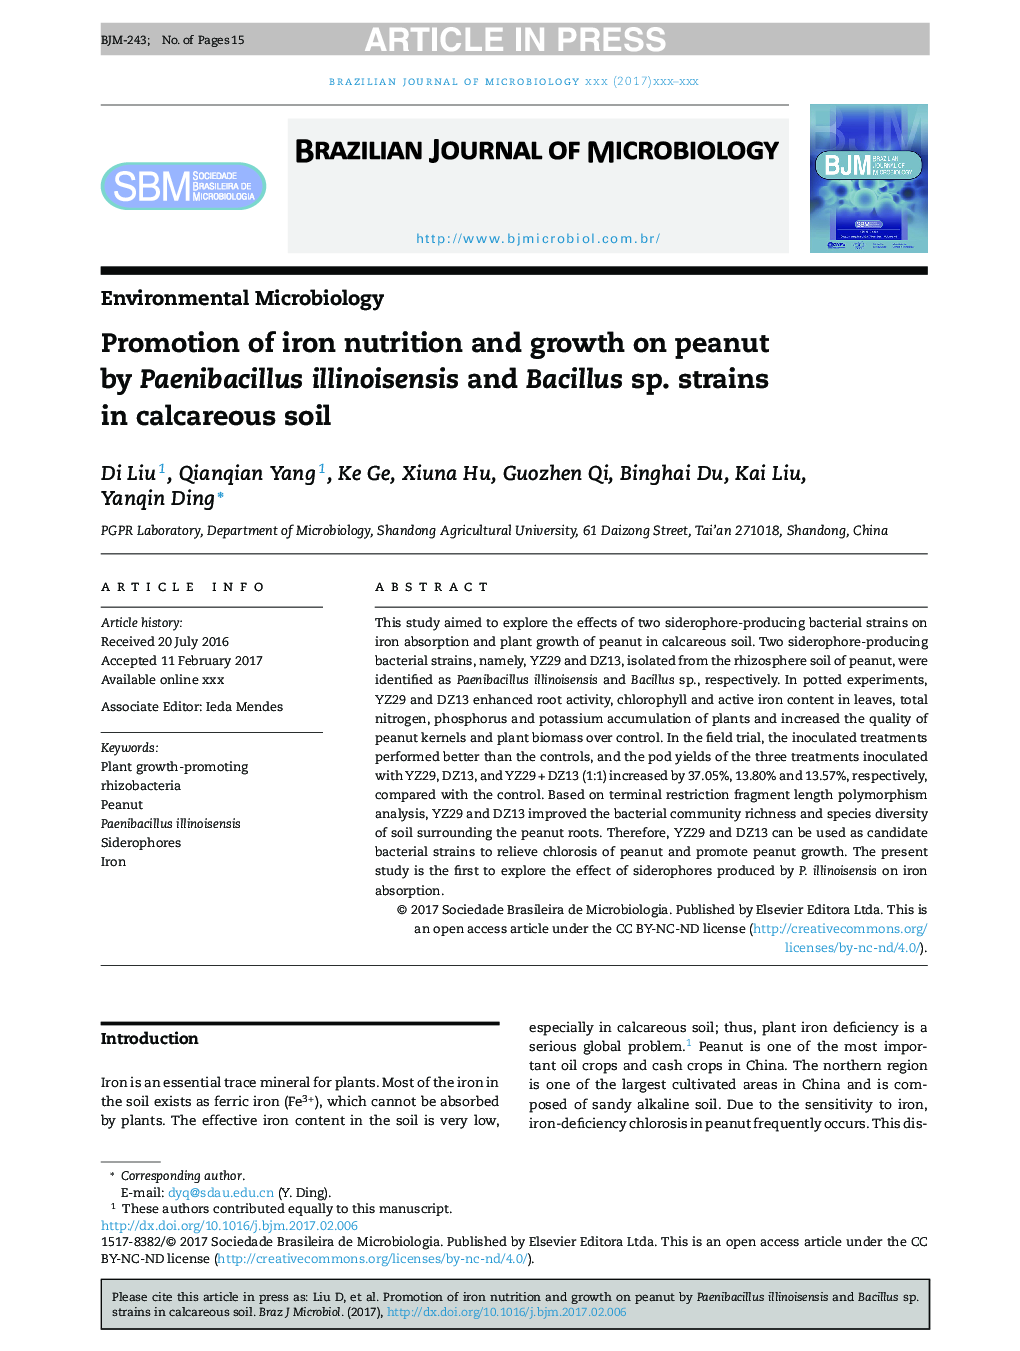 Promotion of iron nutrition and growth on peanut by Paenibacillus illinoisensis and Bacillus sp. strains in calcareous soil